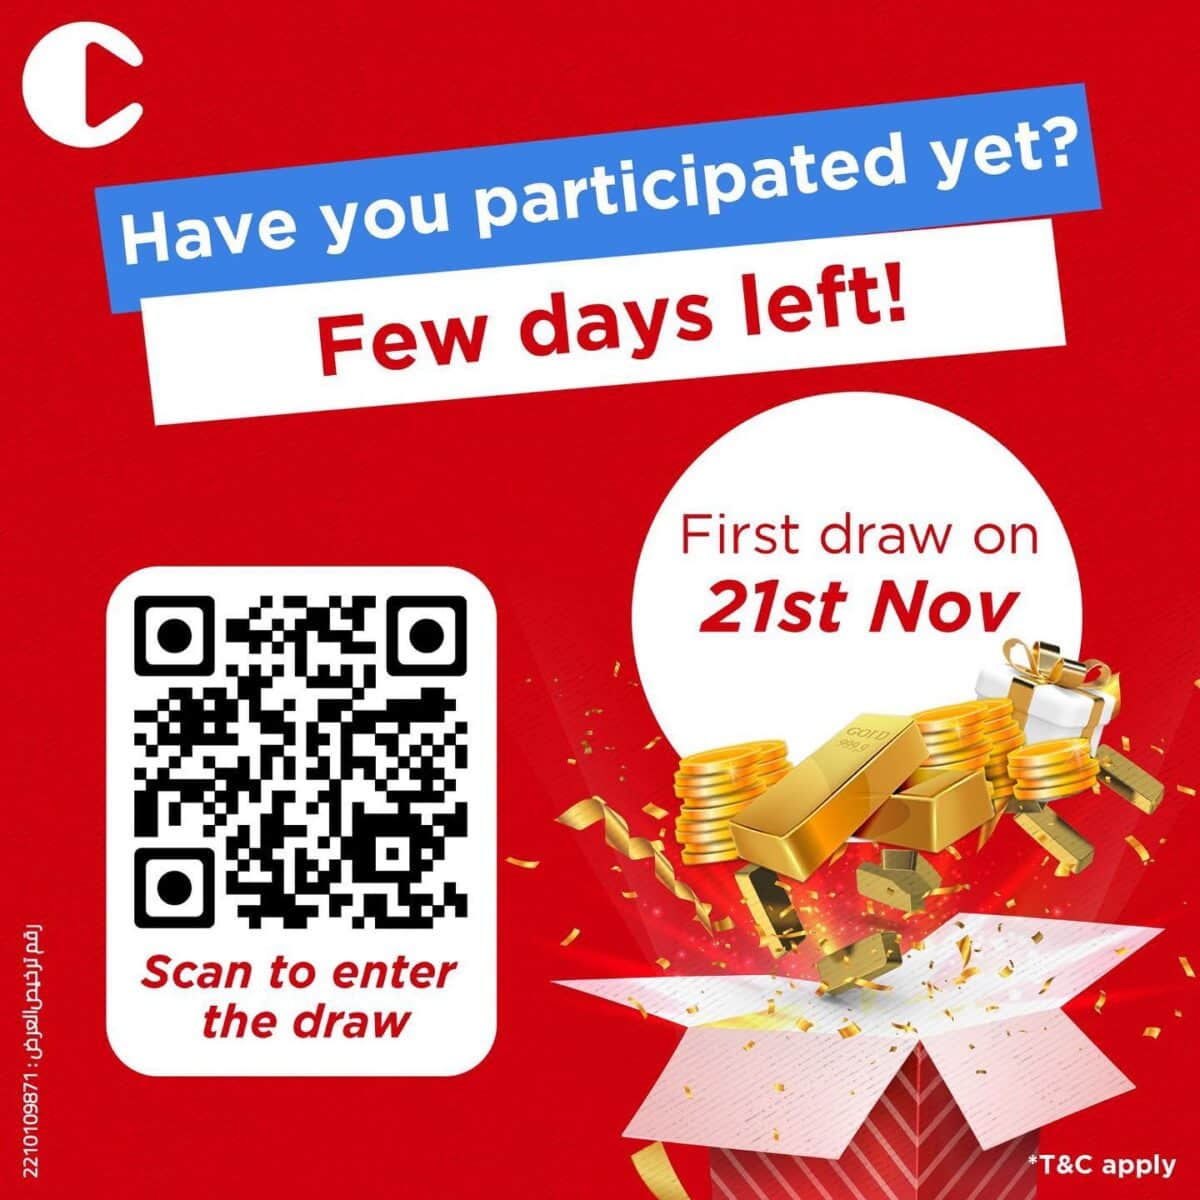 Participate Online in CityBus Lucky Draw, Gold Bar Win in Kuwait